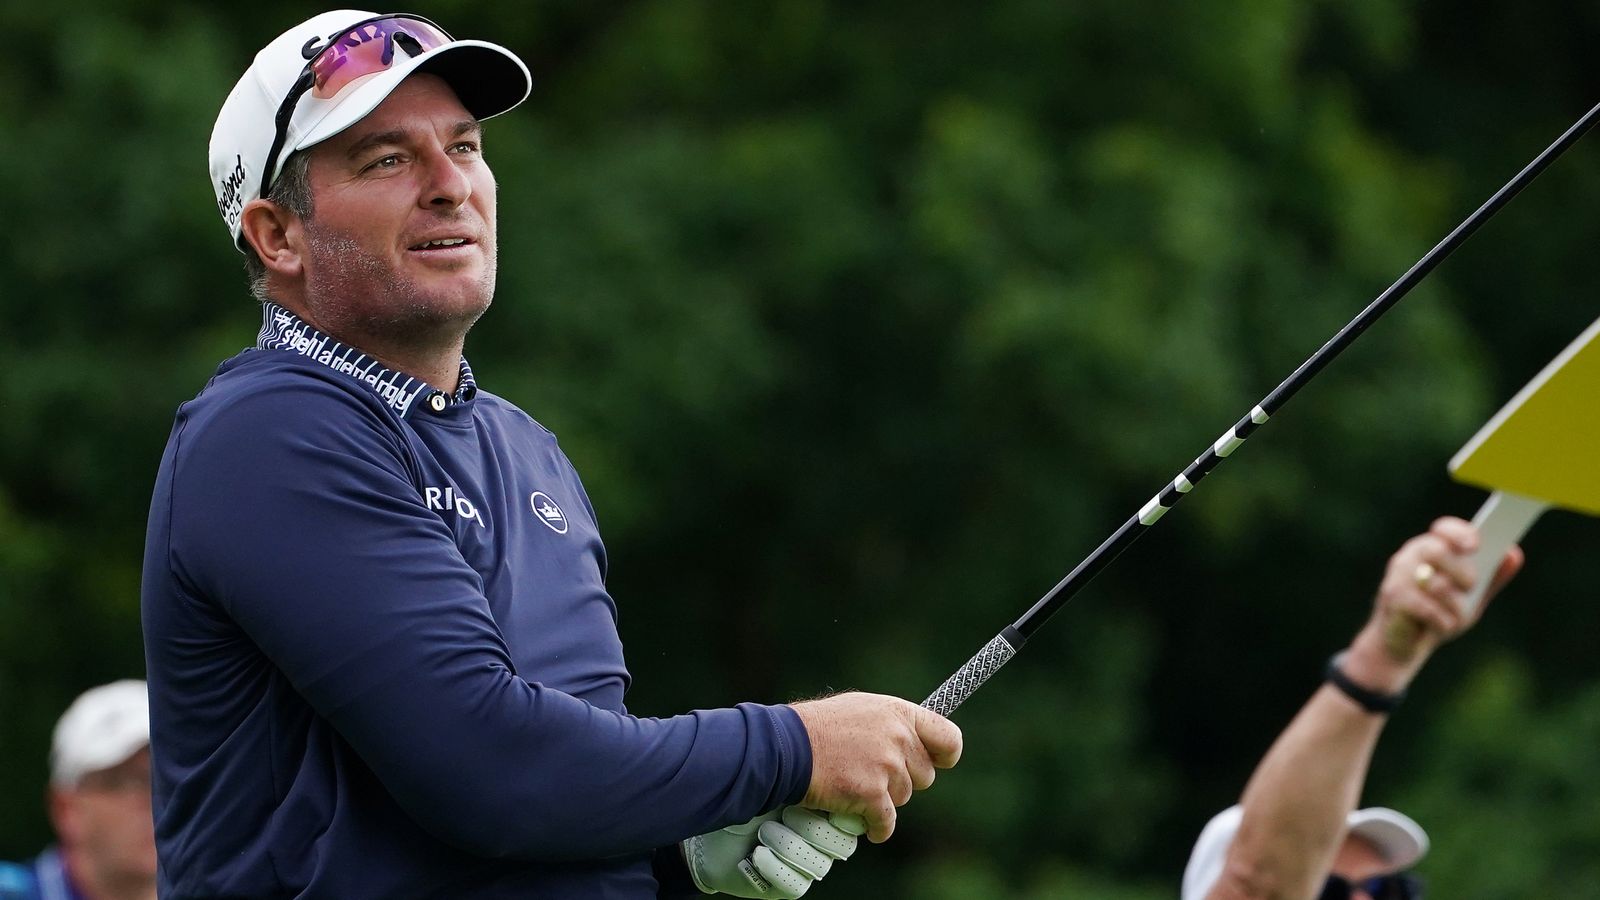 Irish Open: New Zealand’s Ryan Fox Surprised To Be Leading After Opening Round At Mount Juliet